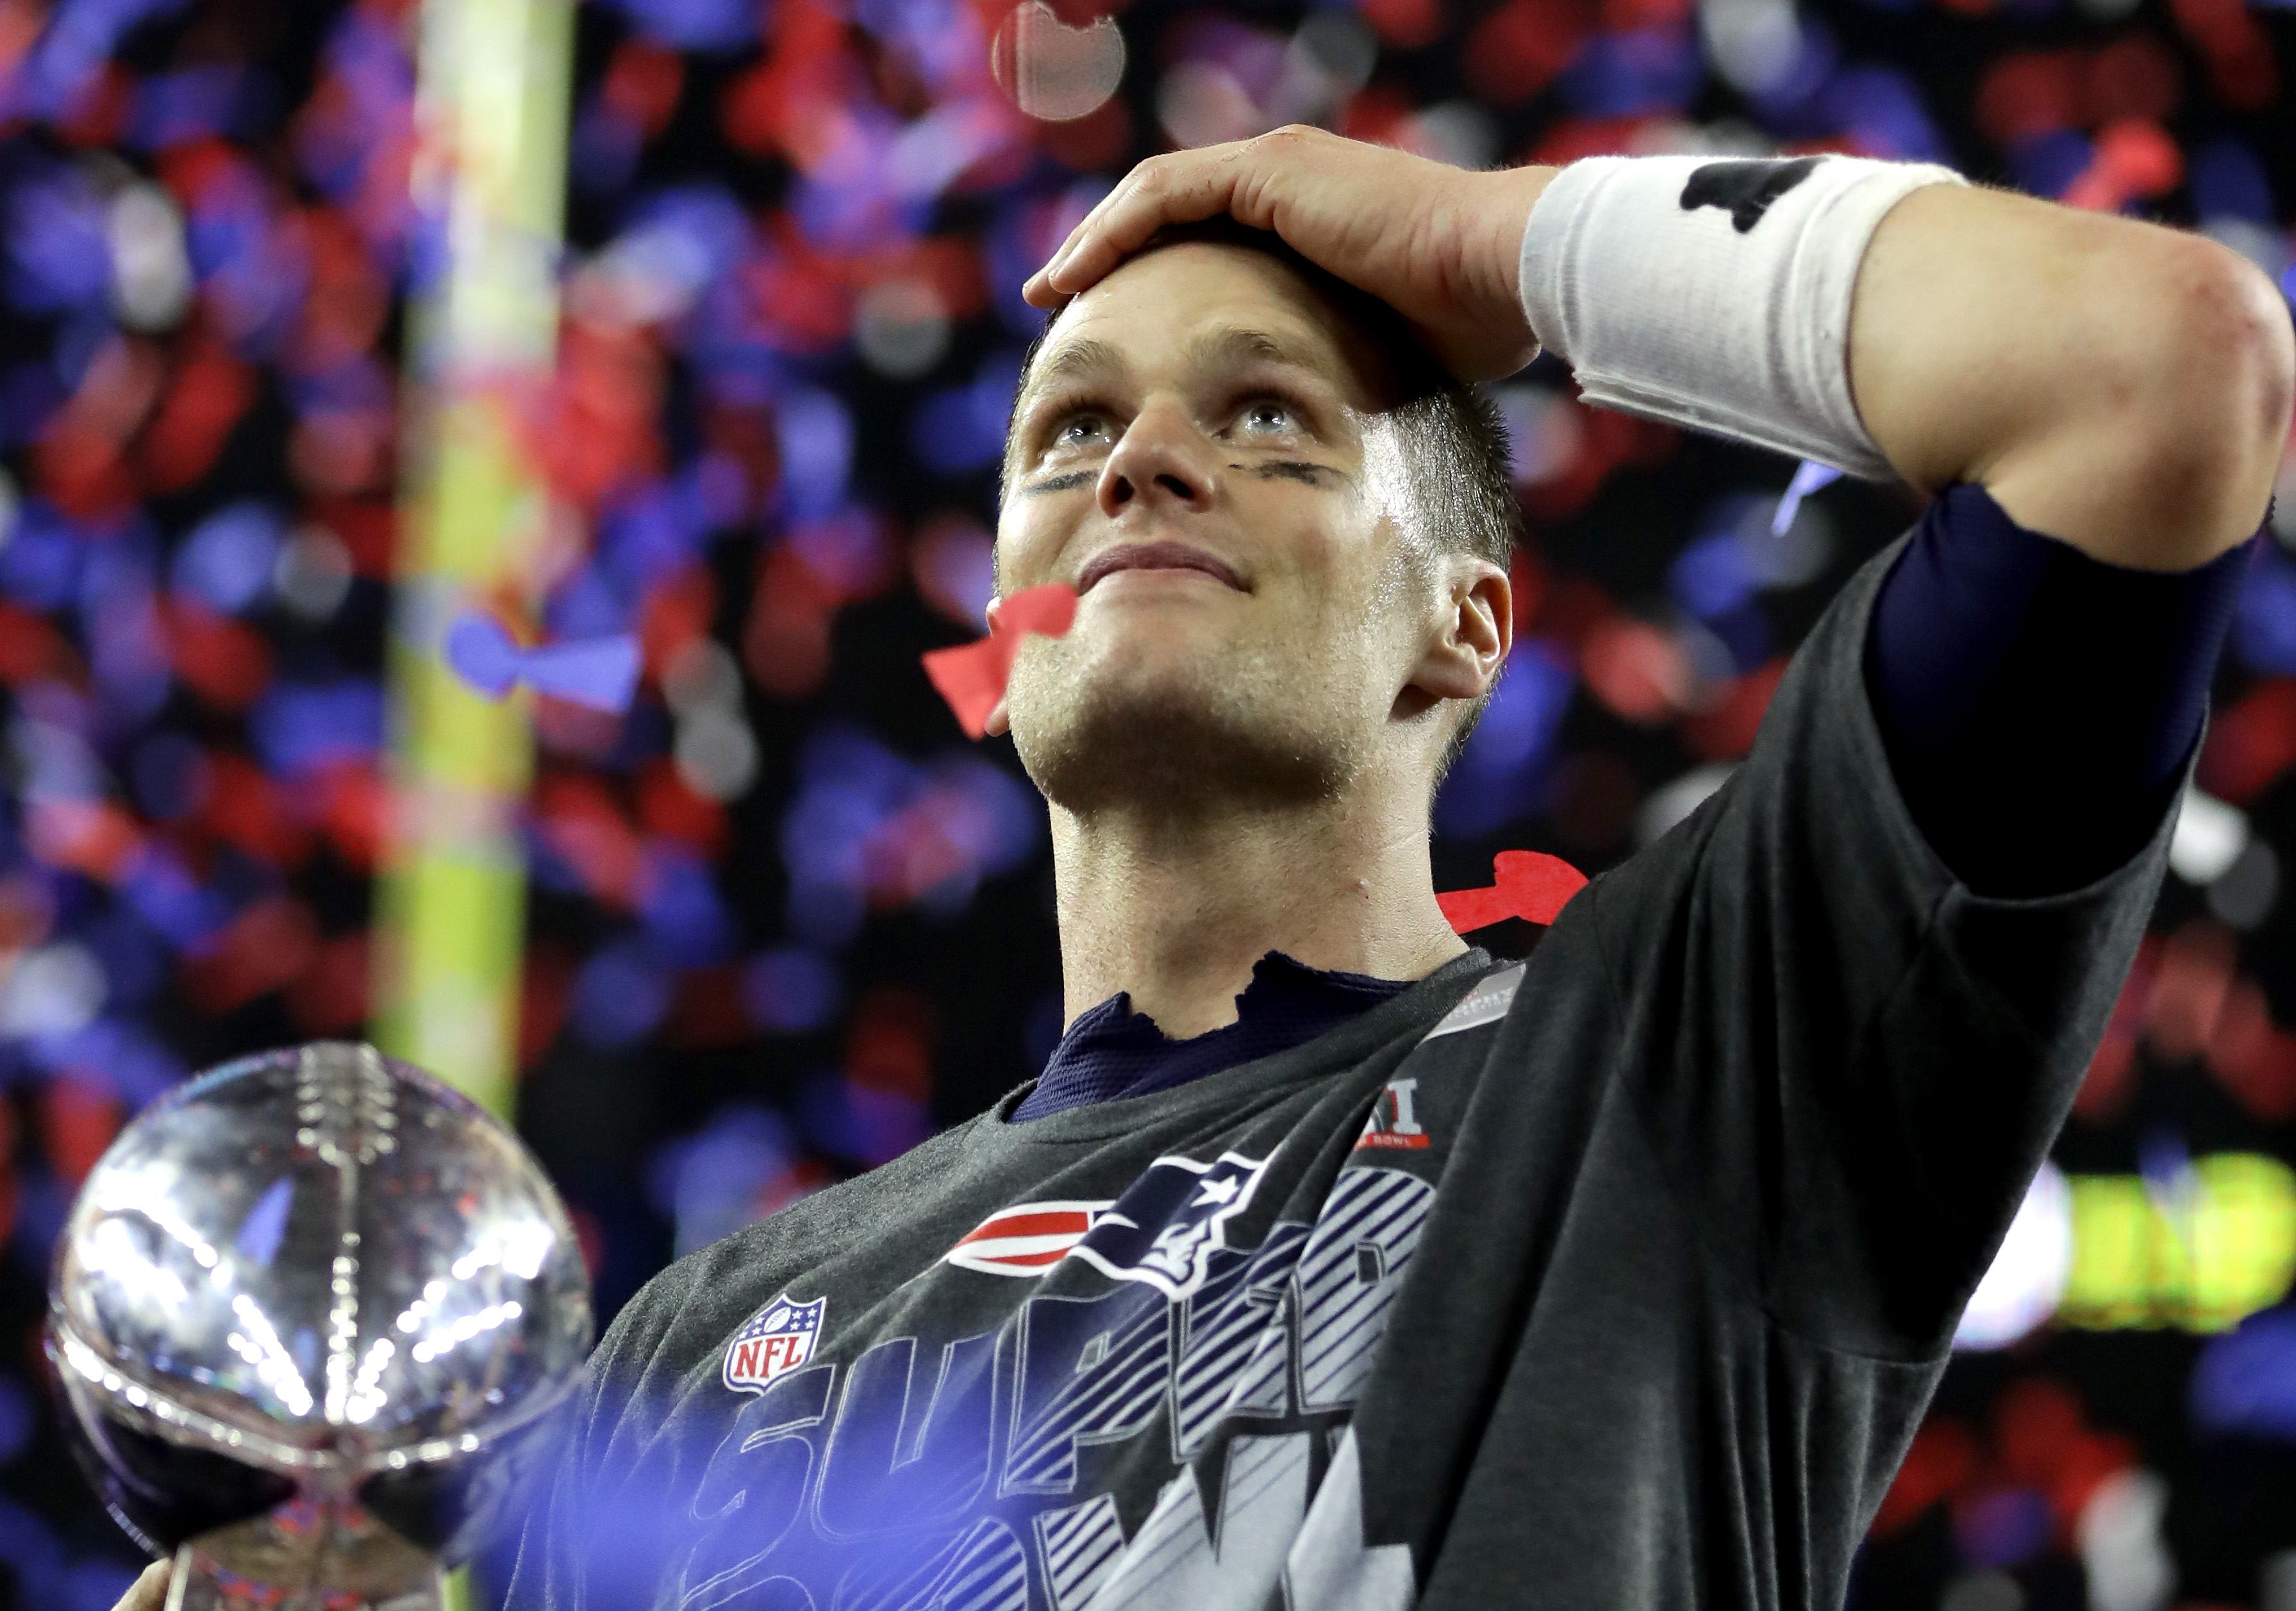 Tom Brady Makes History: Ranking All 7 of His Super Bowl Appearances